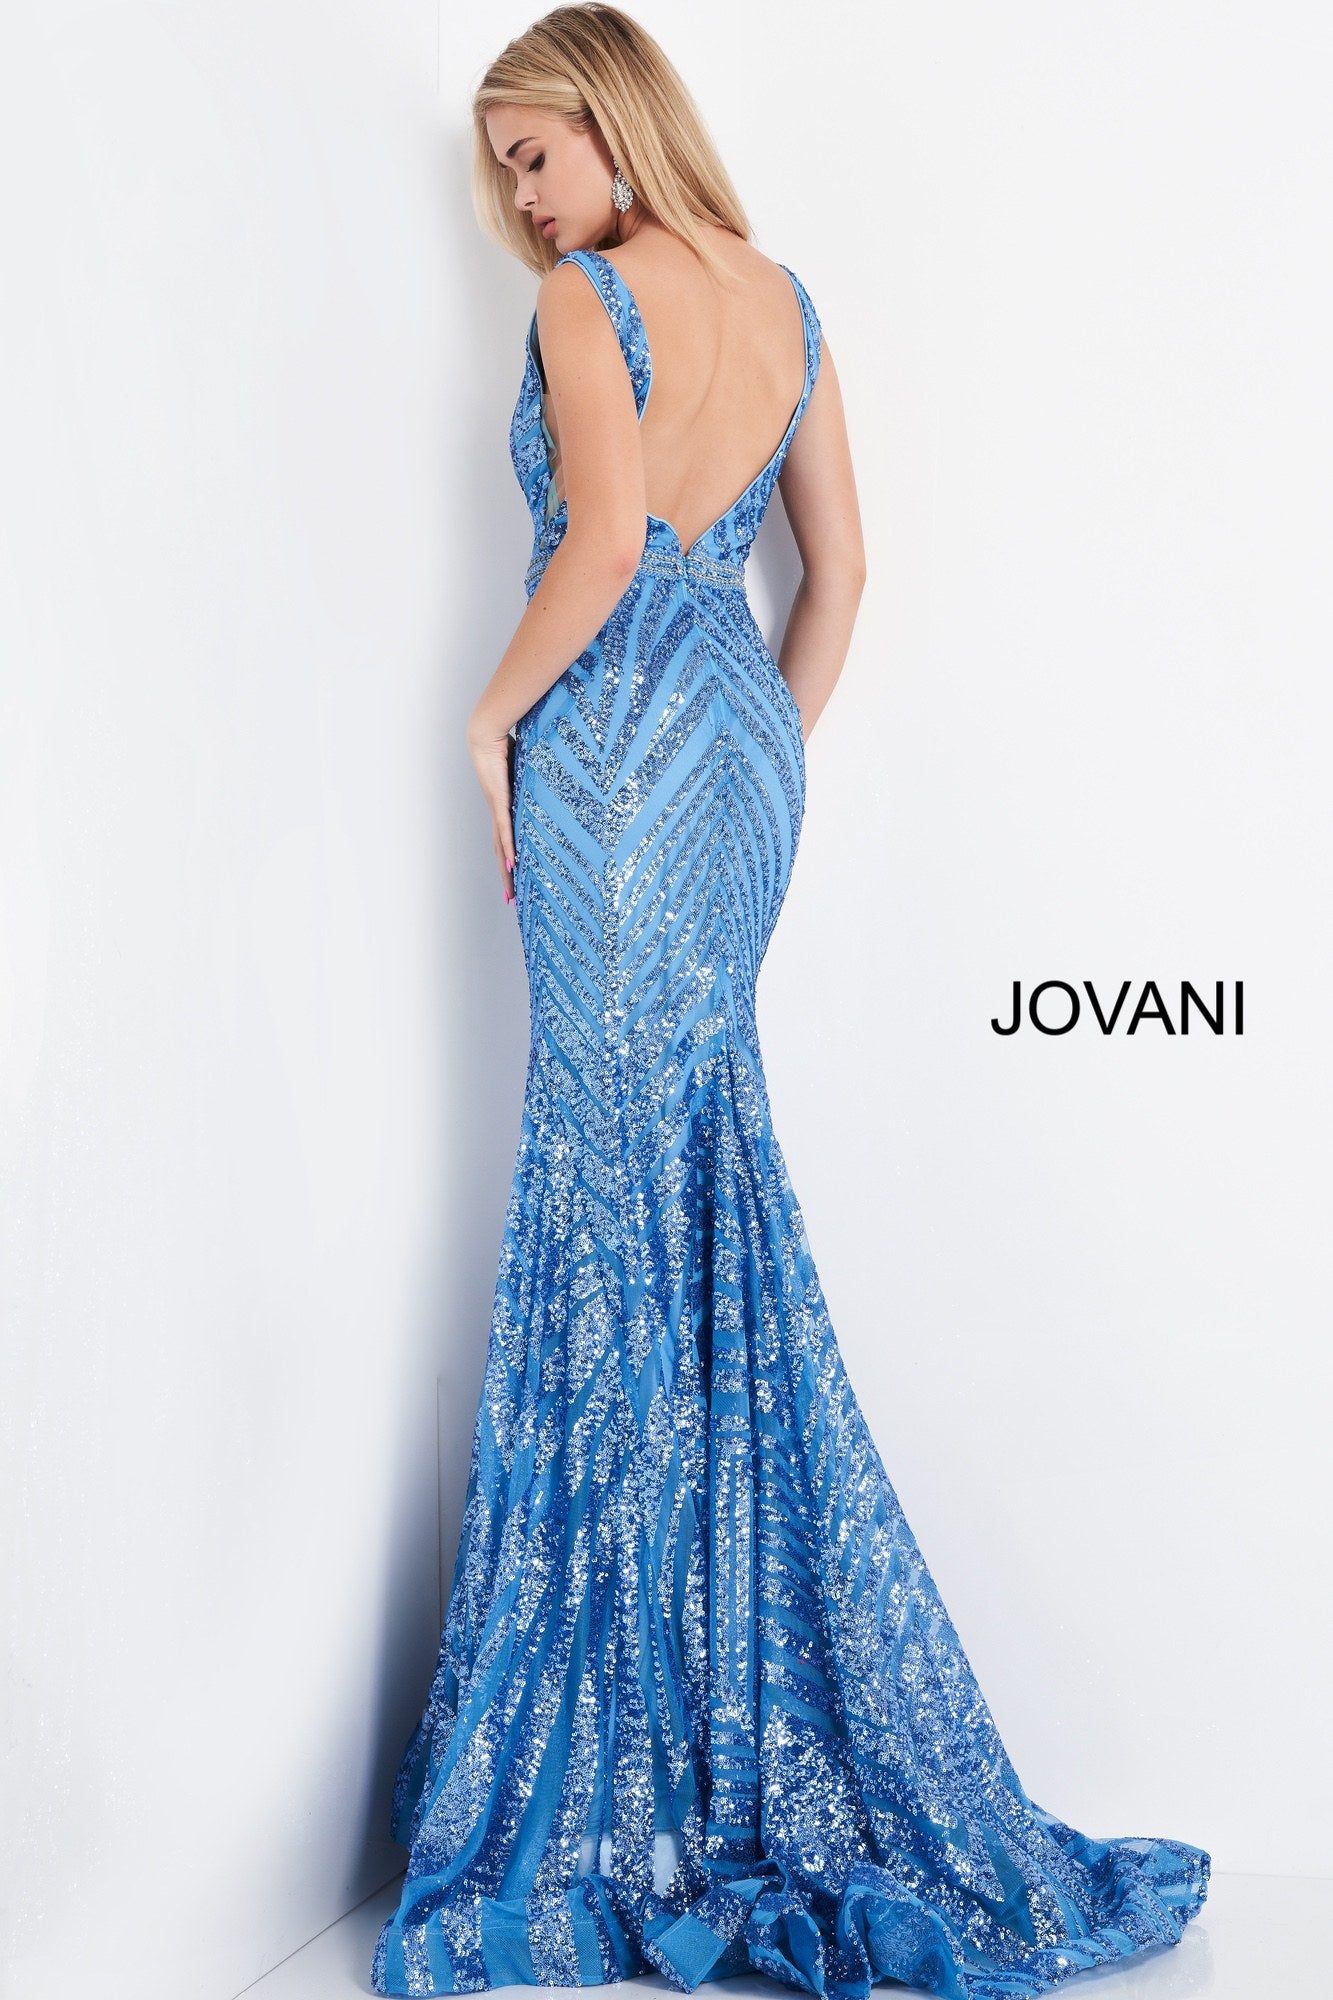 Jovani 03570 Long Fitted Sequin Mermaid Formal Prom Dress V Neck Pageant Gown